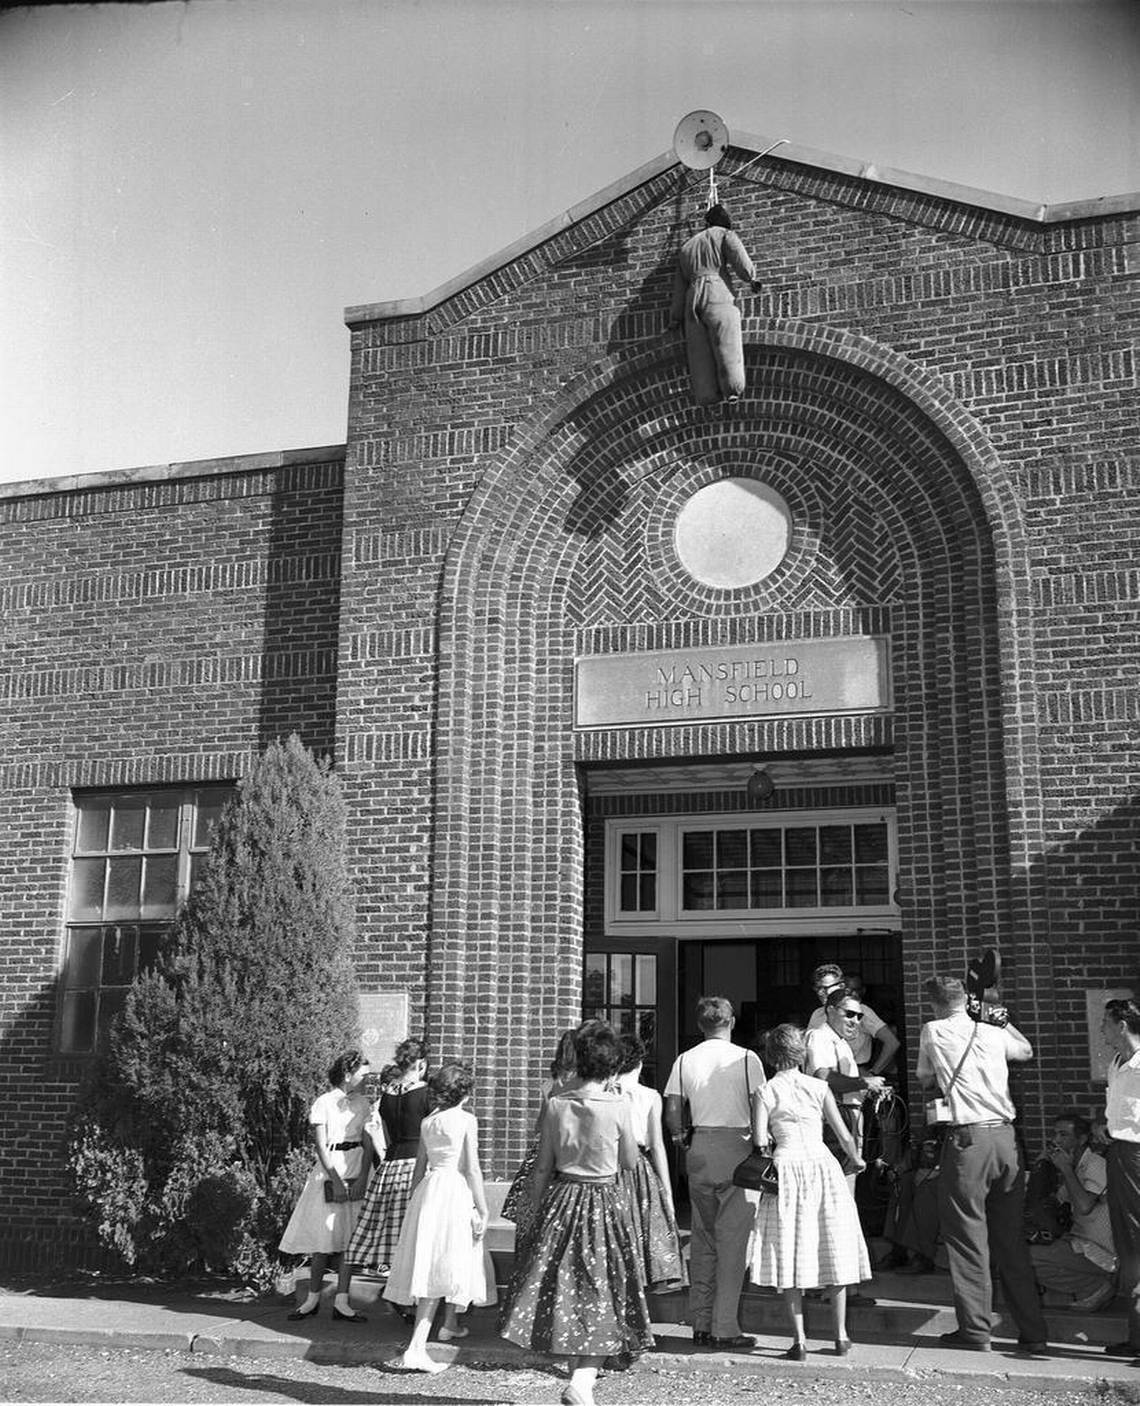 historium:
“A black painted effigy hung as a protest to integration efforts, hangs above the entrance to Mansfield High School, Mansfield, Texas, August 30, 1956
”
1956. Let that sink in for a minute and try to tell me the racism in modern America...